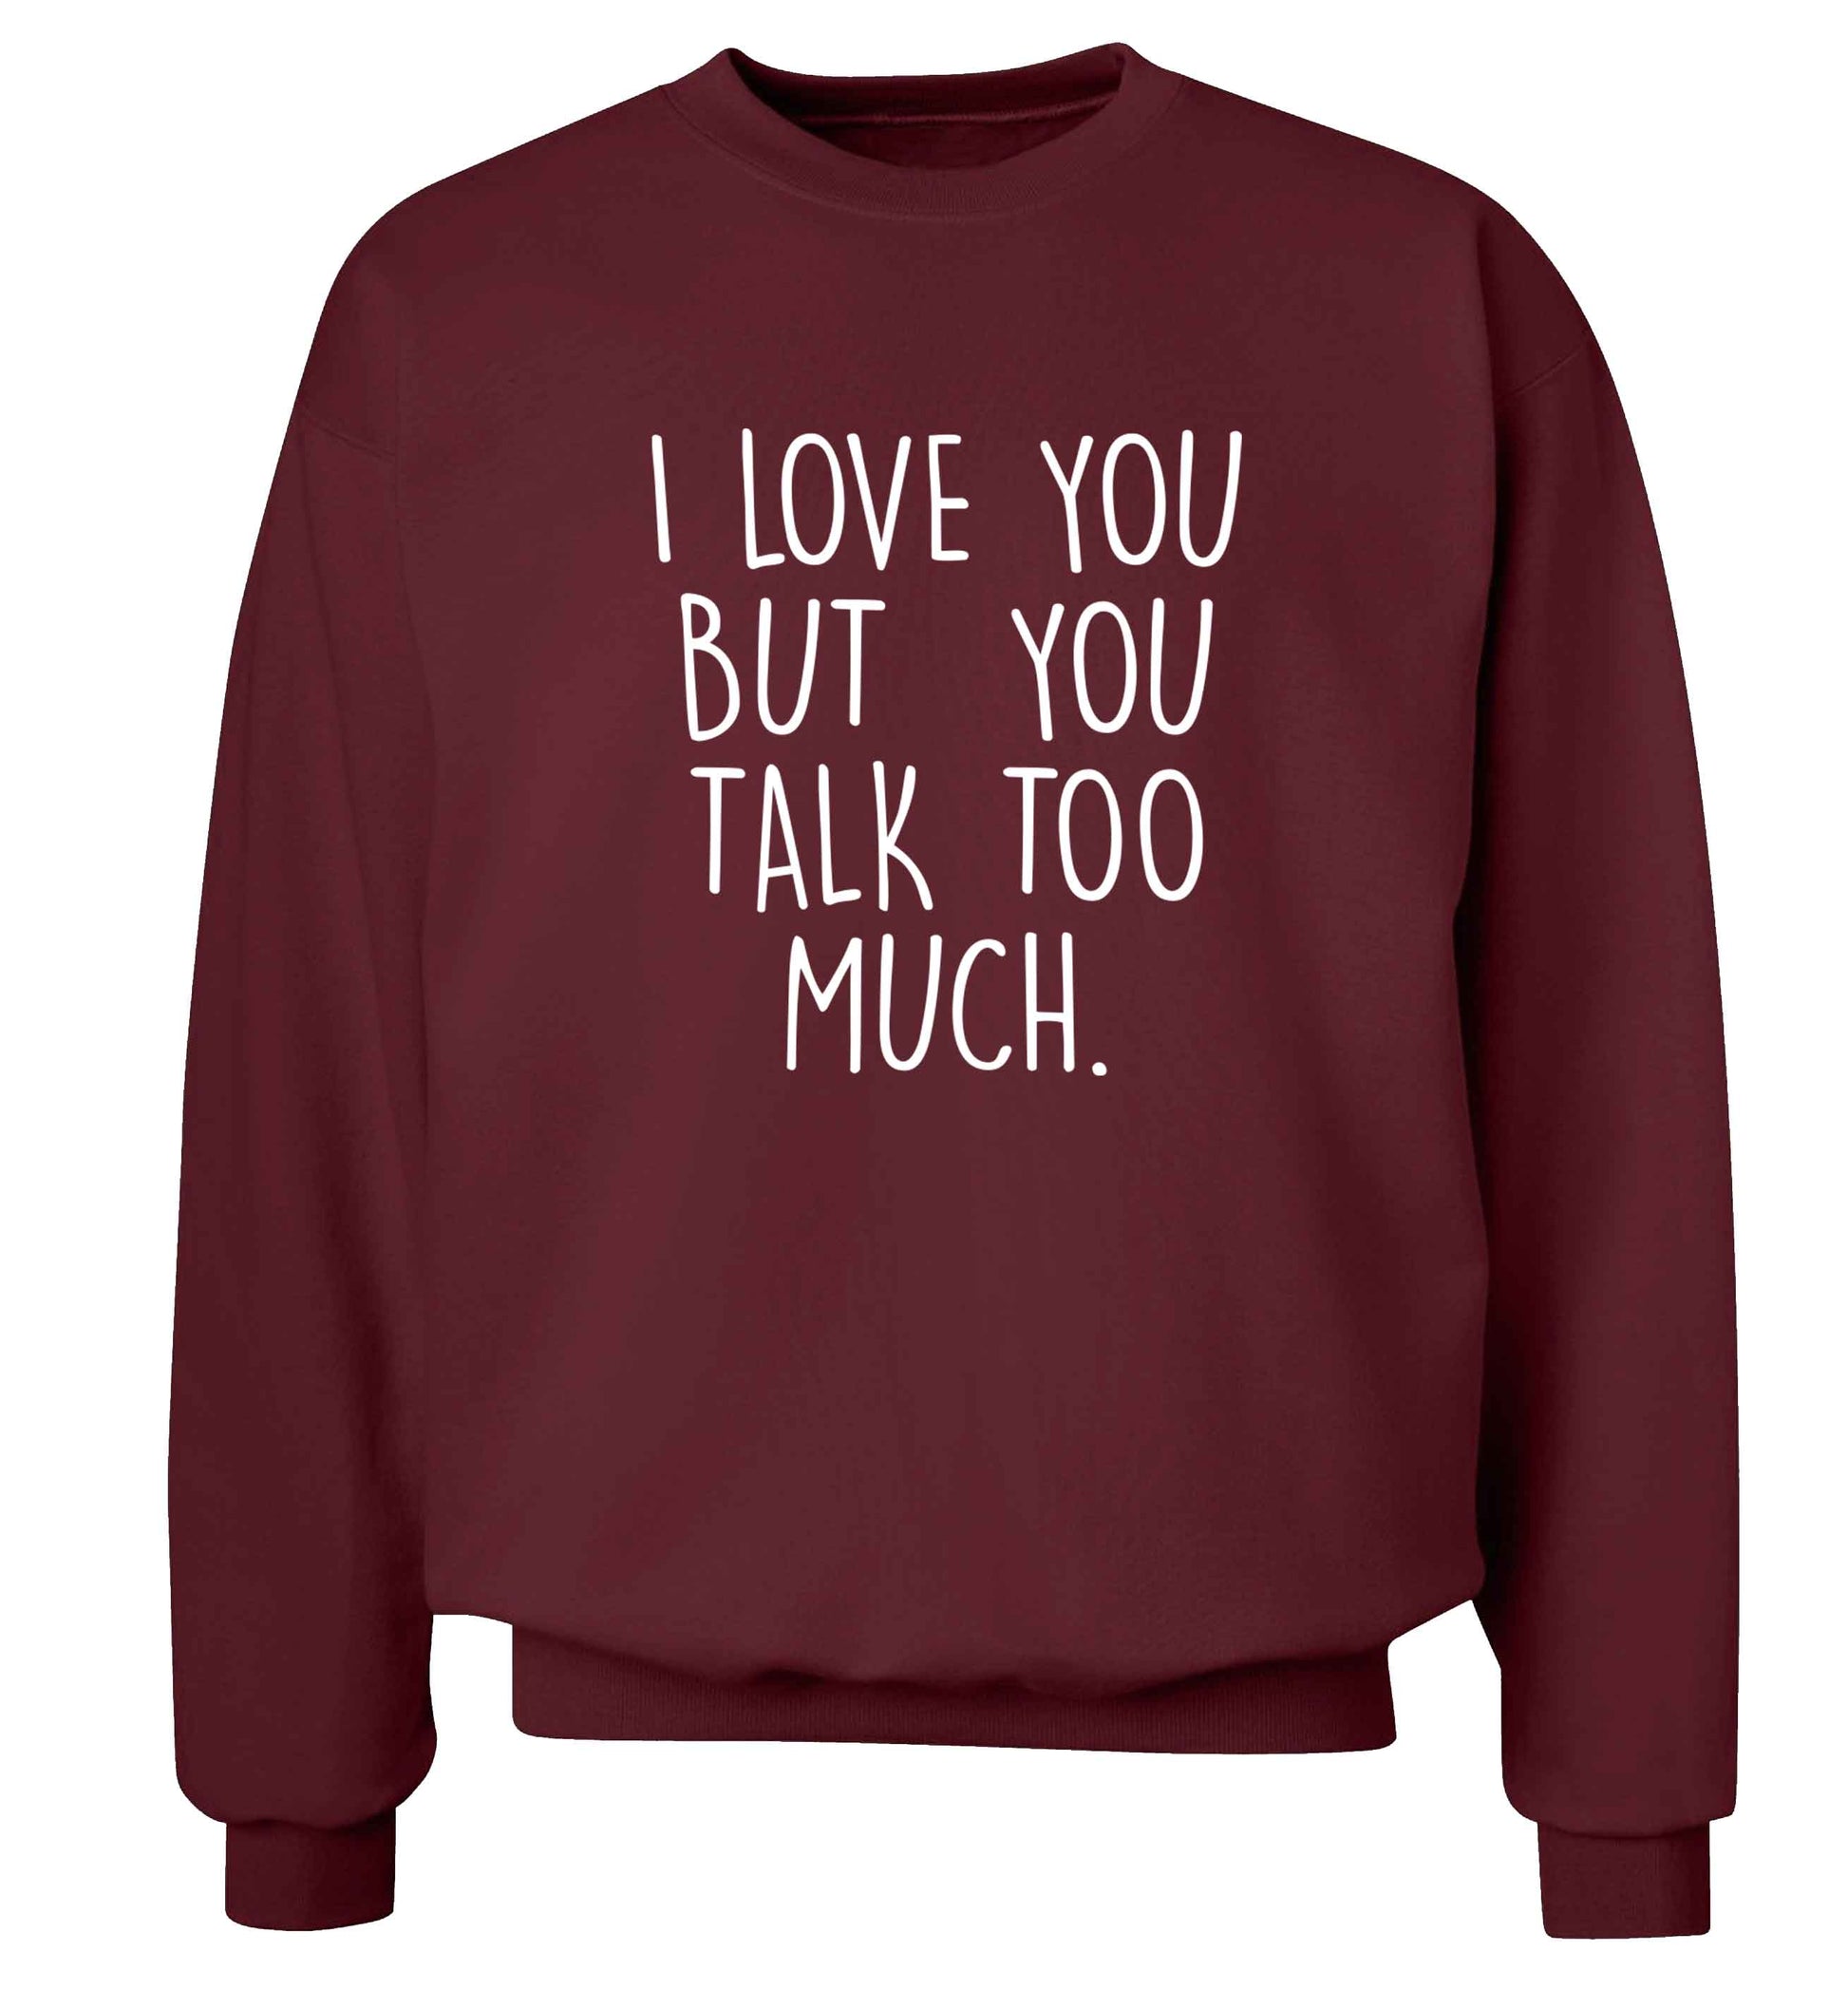 I love you but you talk too much adult's unisex maroon sweater 2XL